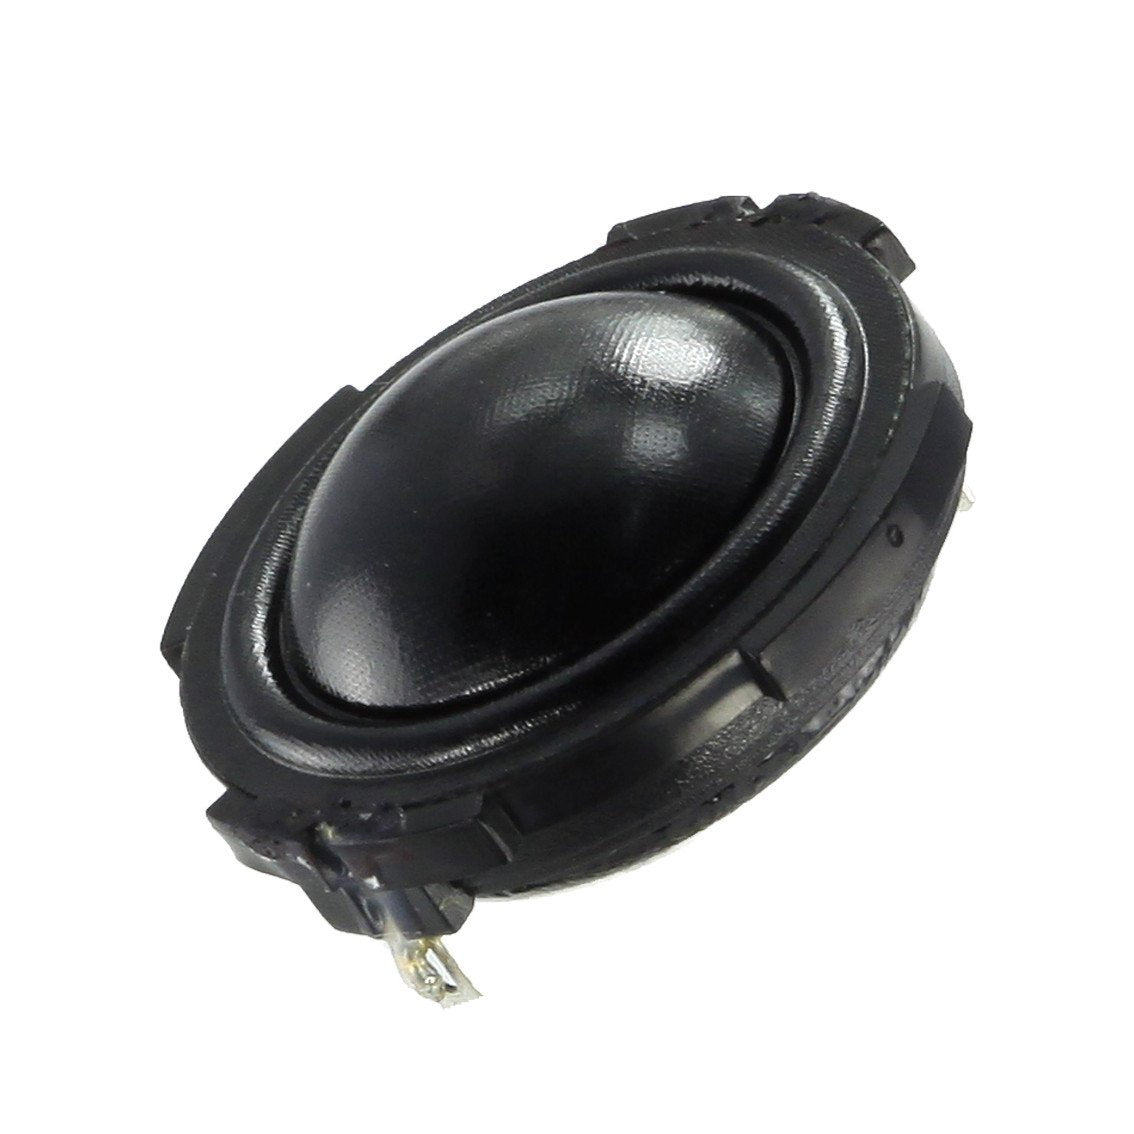 Replacement tweeter for Bowers and Wilkins CDM1 and P6